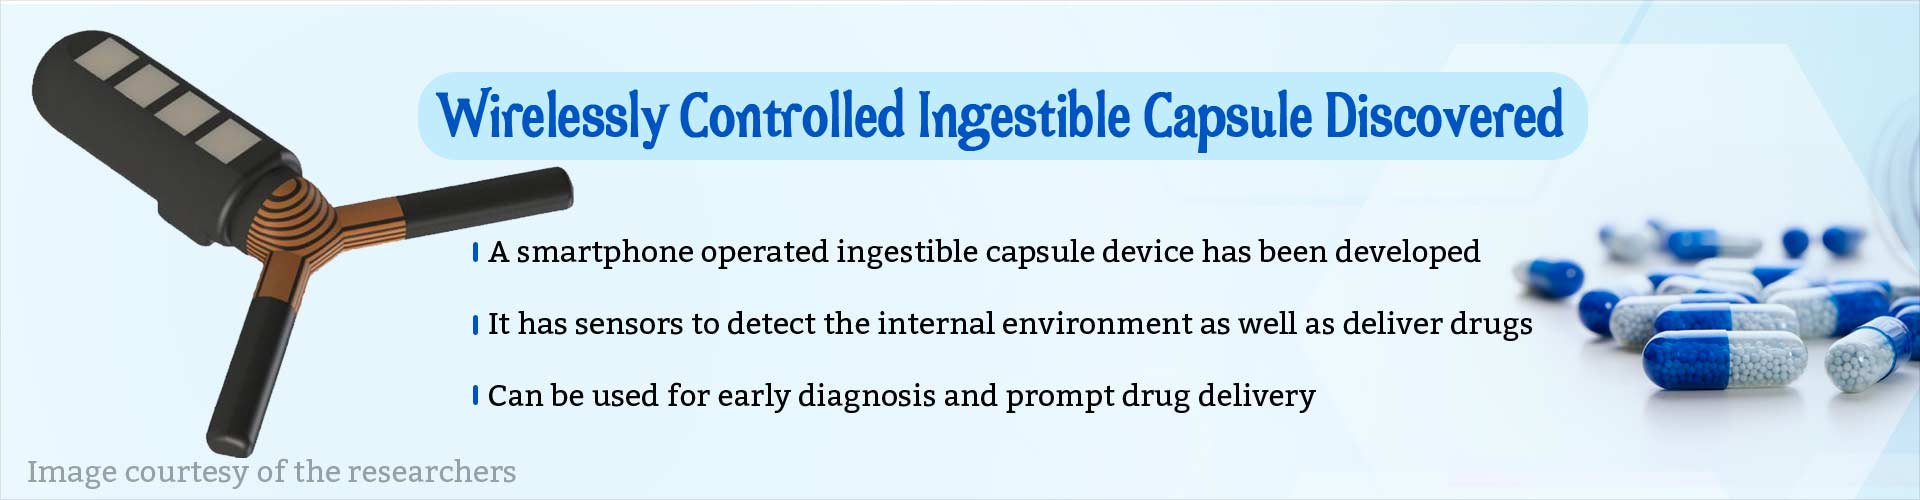 Wirelessly controlled ingestible capsule discovered. A smartphone operated ingestible capsule device has been developed. It has sensors to detect the internal environment as well as deliver drugs. Can be used for early diagnosis and prompt drug delivery.